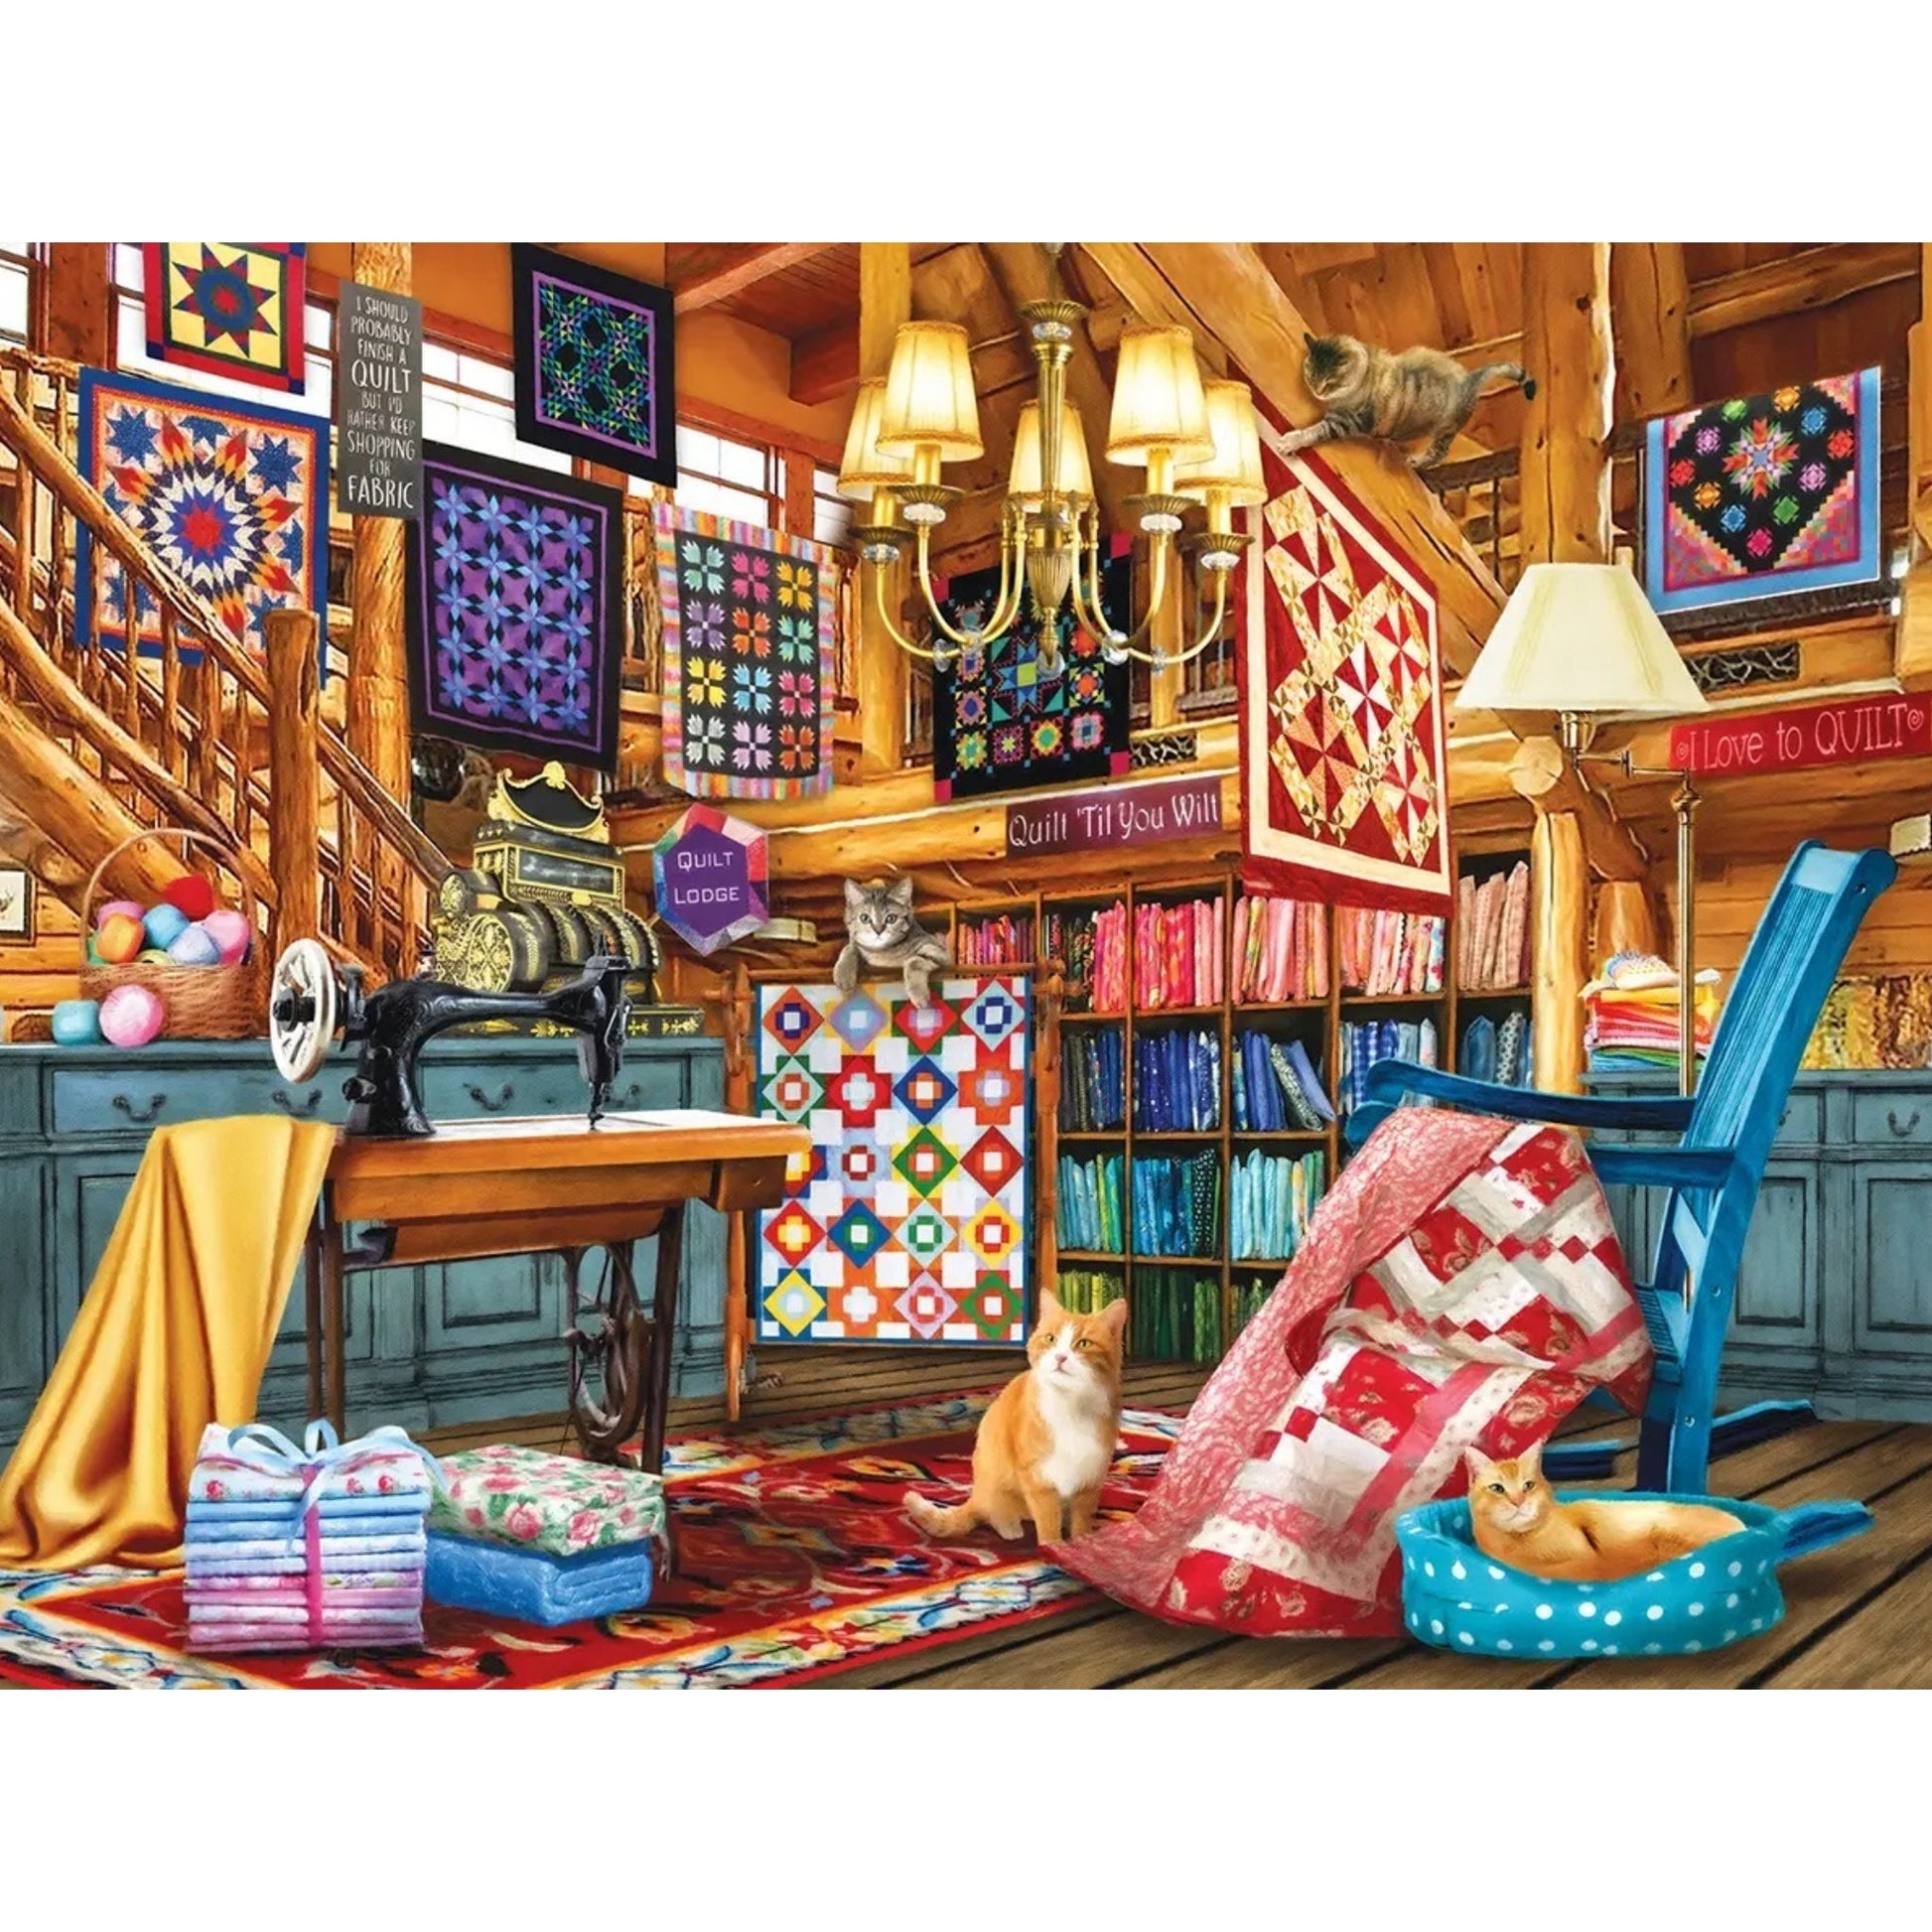 The Quilt Lodge Puzzle - Made in the USA